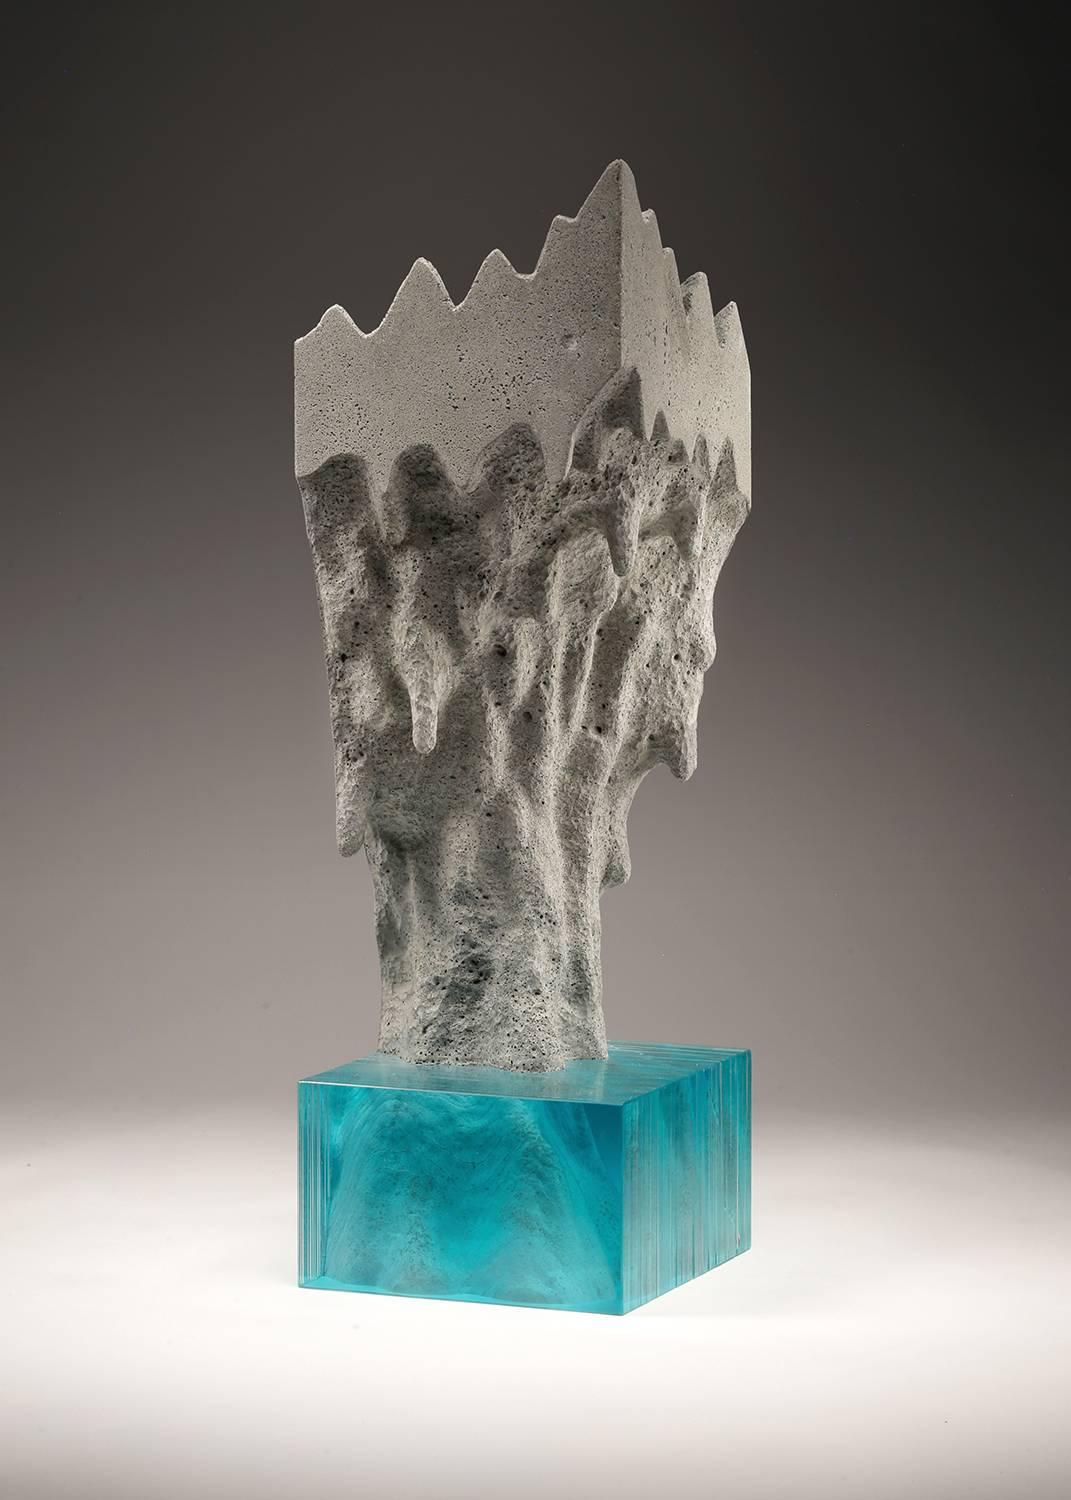 Laminated float glass, concrete, and bronze detail

In this piece, Young depicts a deep dual-layered cliff of the deep ocean with a peaceful oasis hiding down below. The artist draws his concept then cuts each sheet of glass by hand and creates a